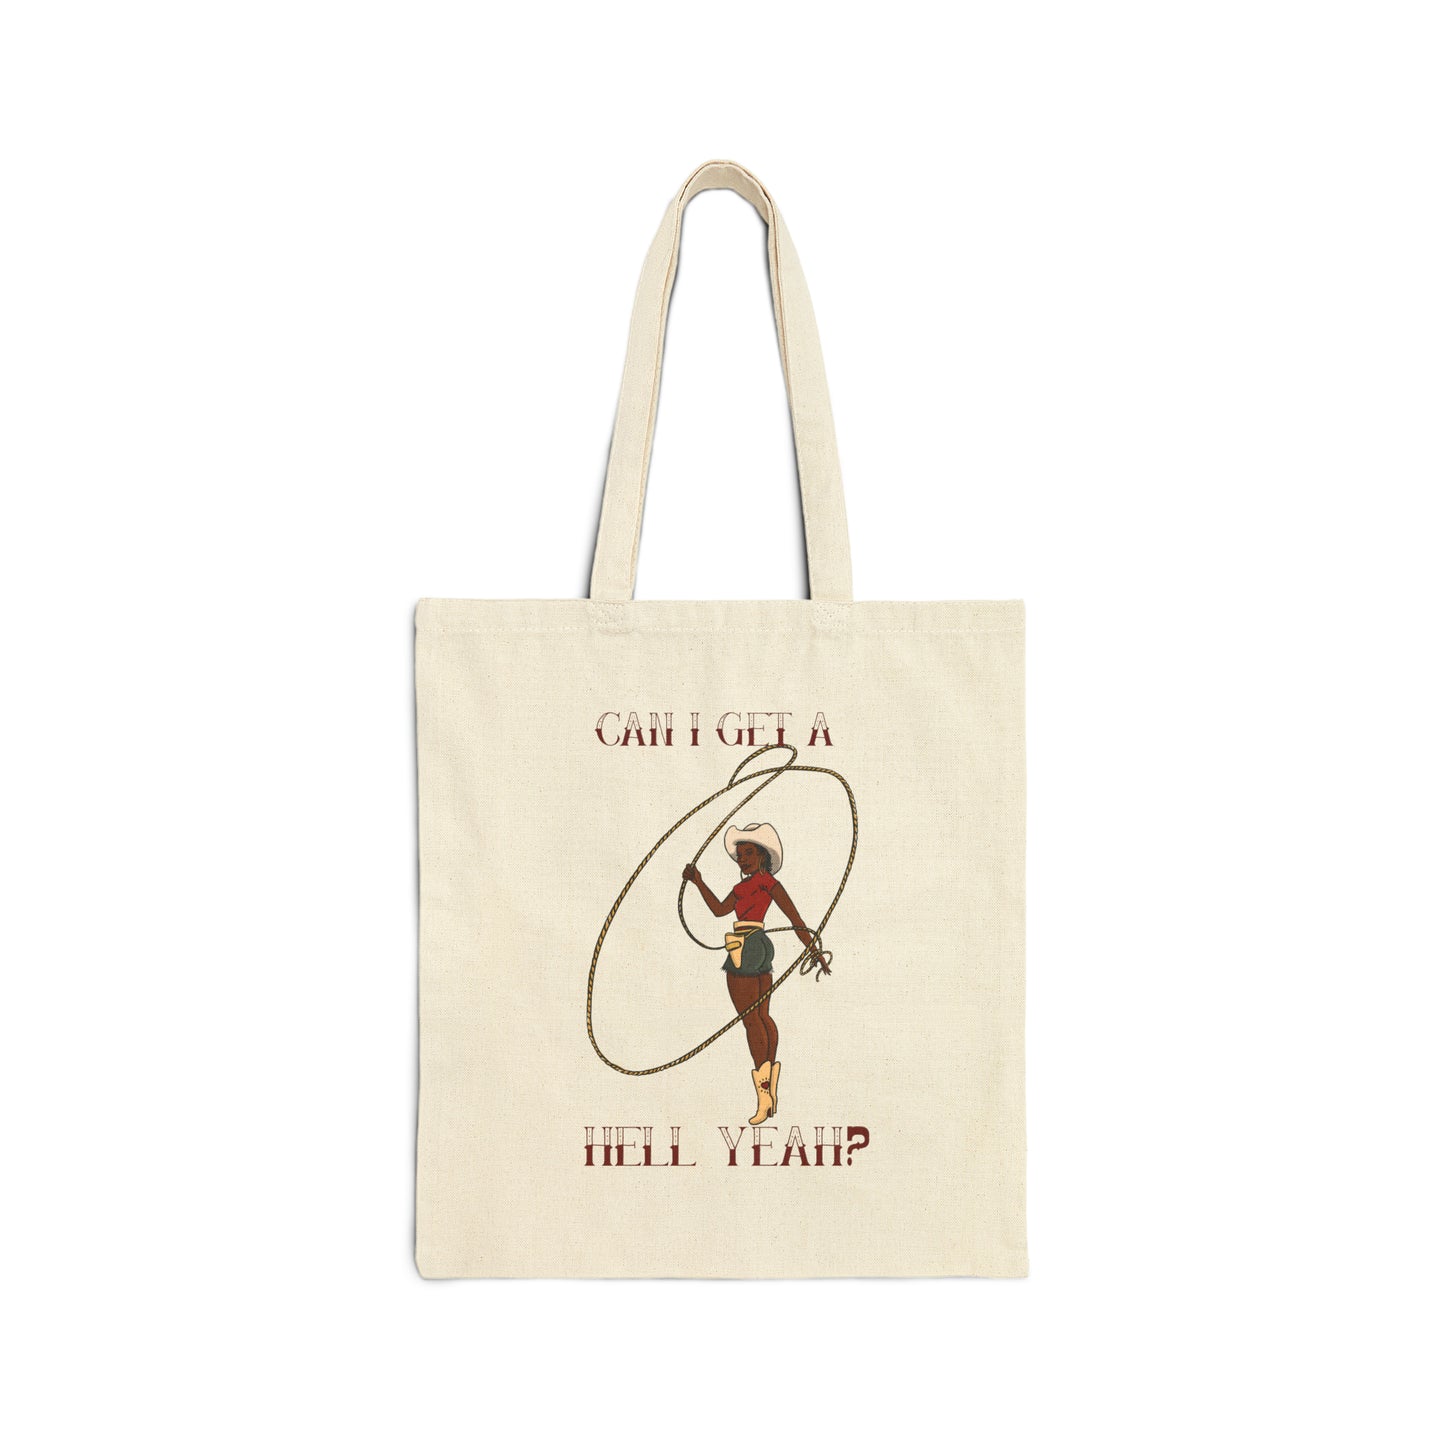 Hell Yeah Cotton Canvas Tote Bag